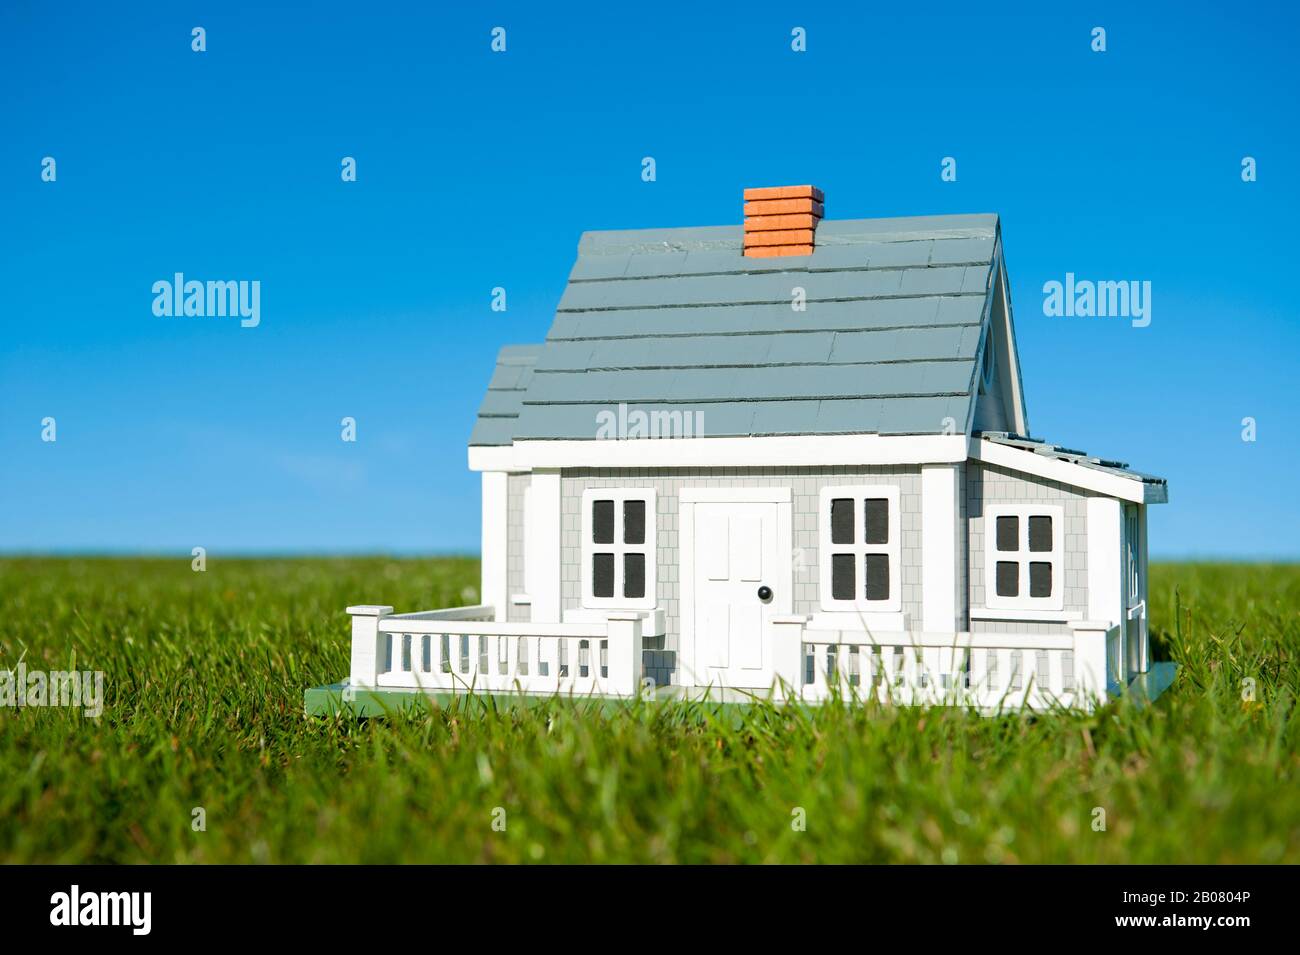 Miniature house with white picket fence standing in lush green grass lawn in front of a blue sky horizon Stock Photo